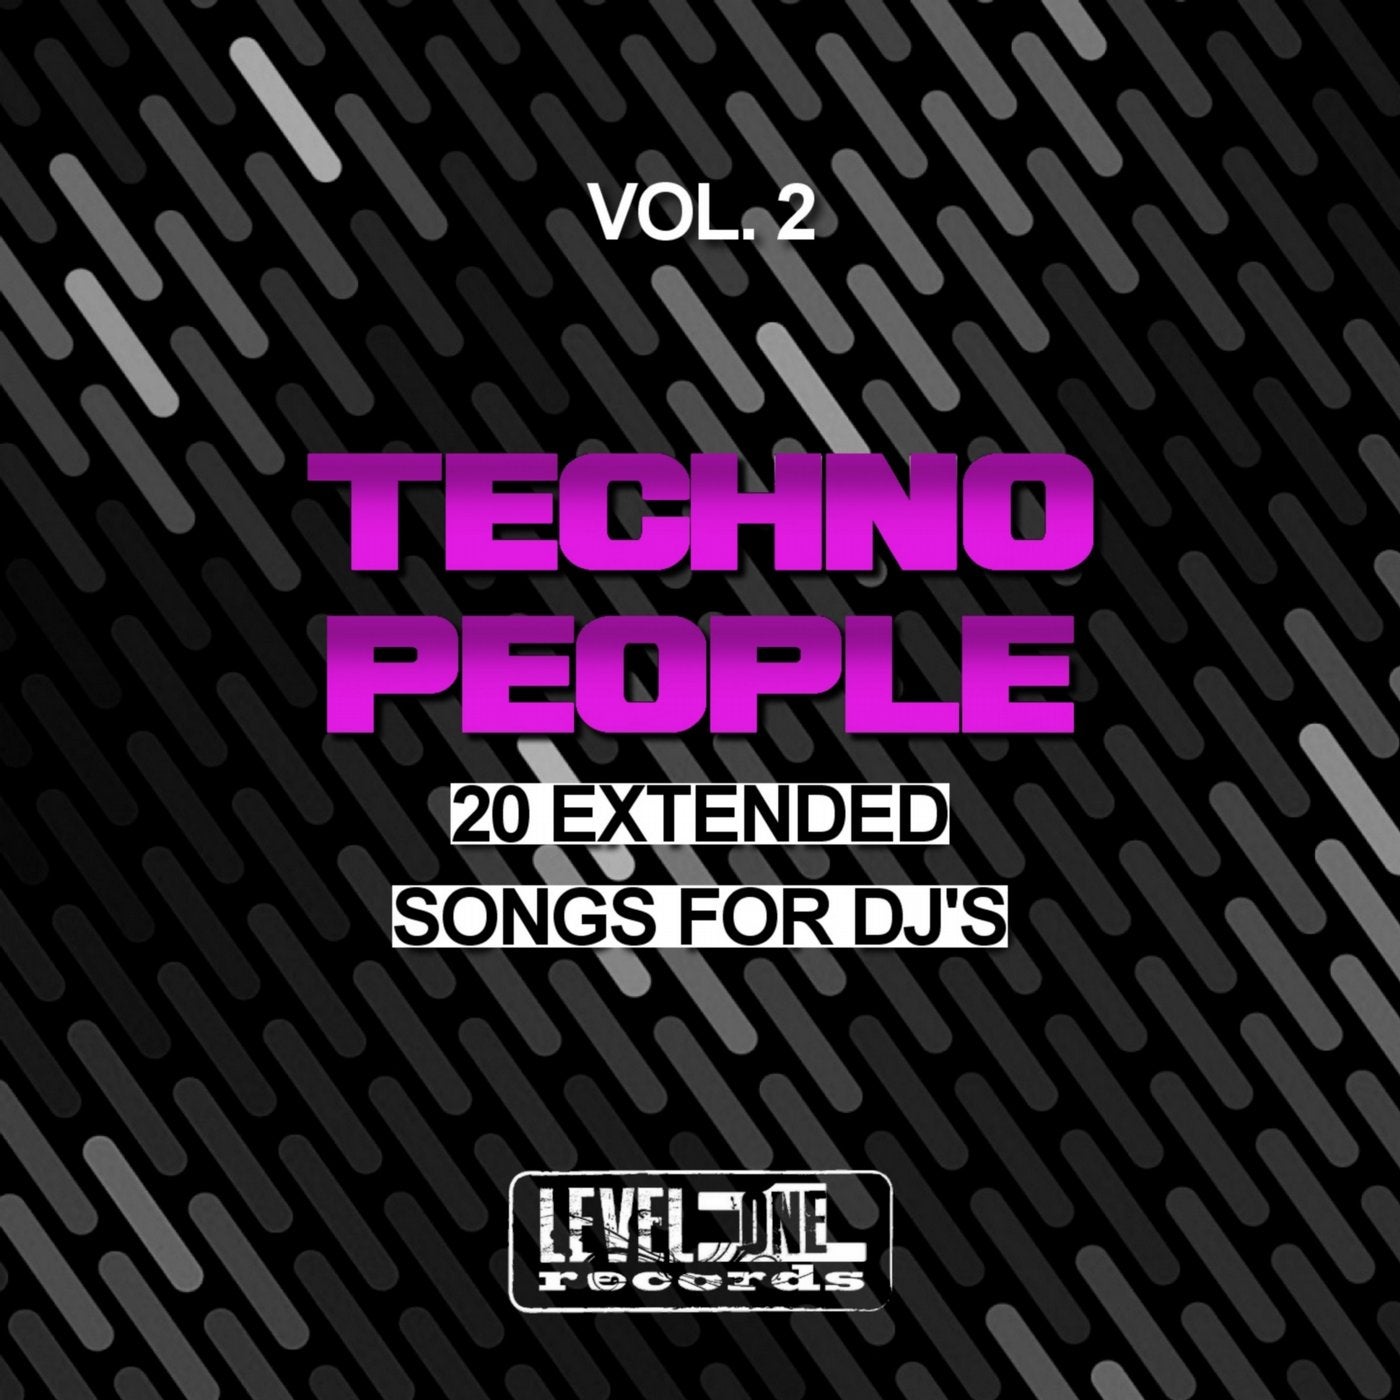 Techno People, Vol. 2 (20 Extended Songs For DJ's)